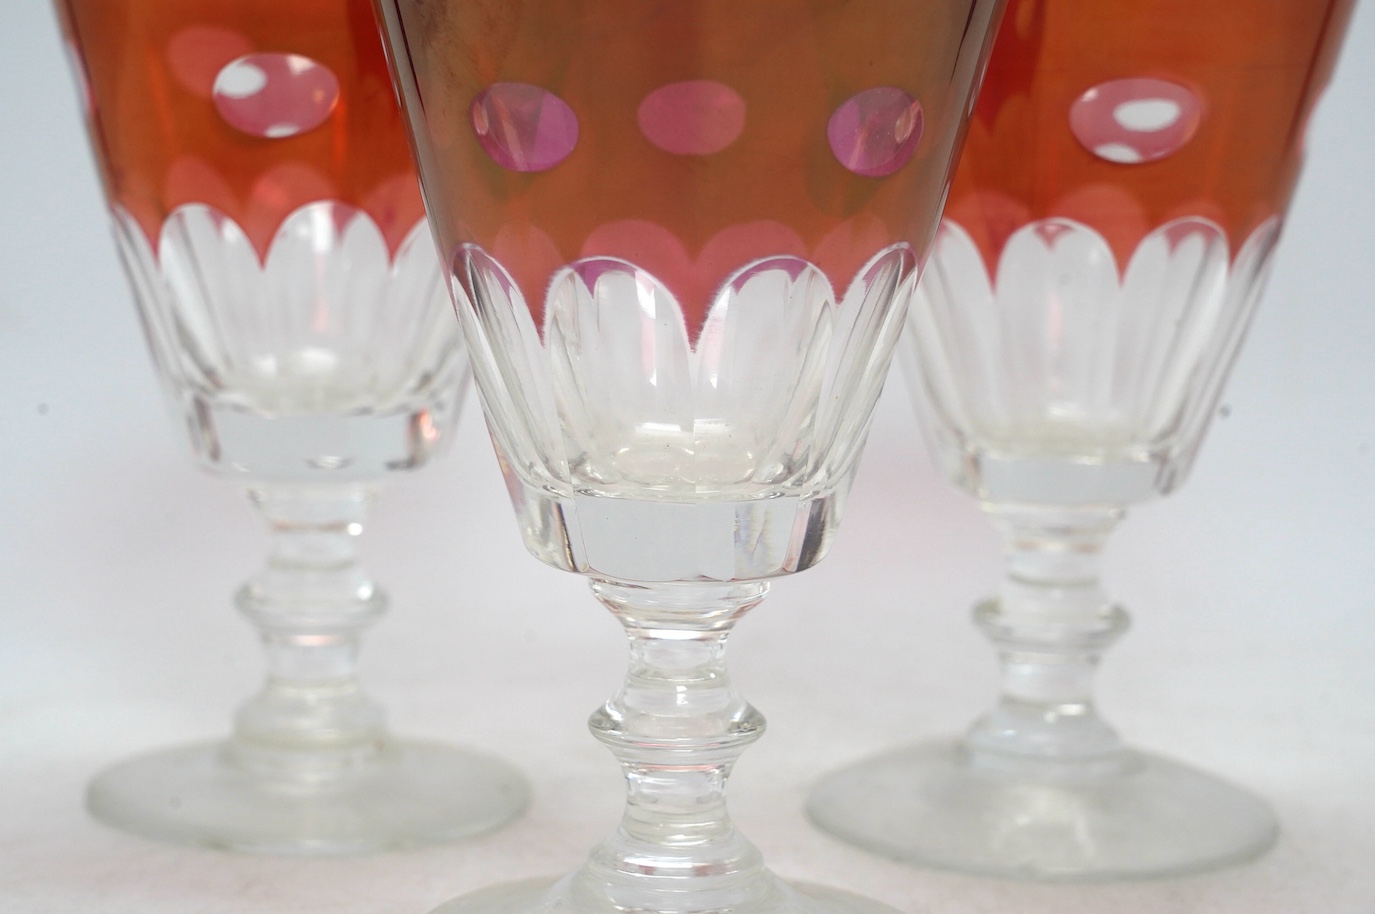 Twelve red lustre cut glass, stemmed wine glasses. 15cm high. Condition - fair to good